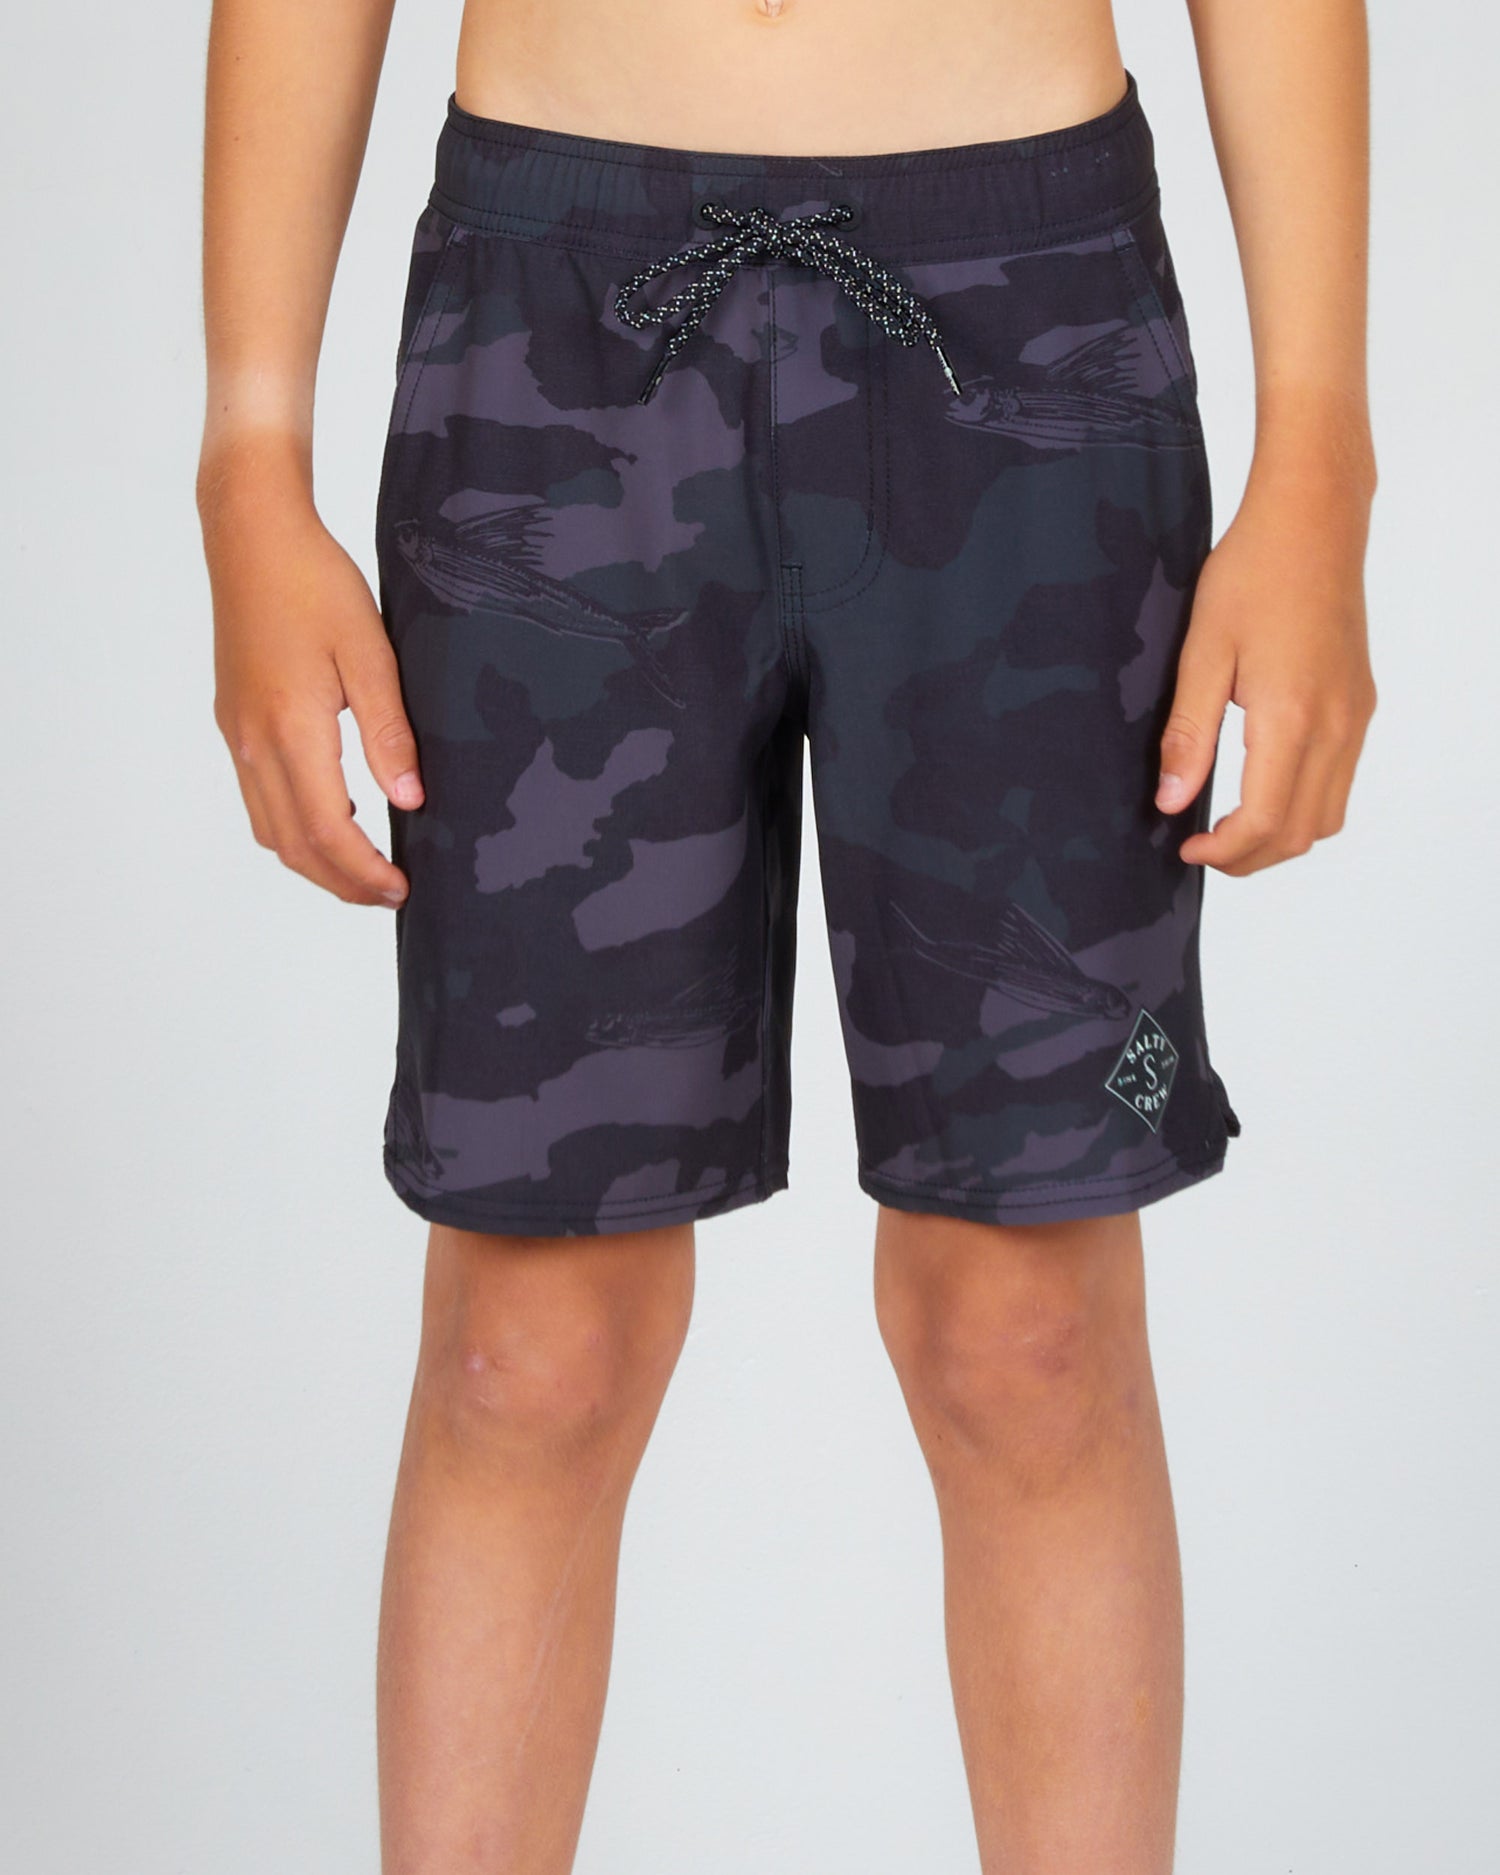 On body front view of the Lowtide Boys Black Camo Elastic Boardshort